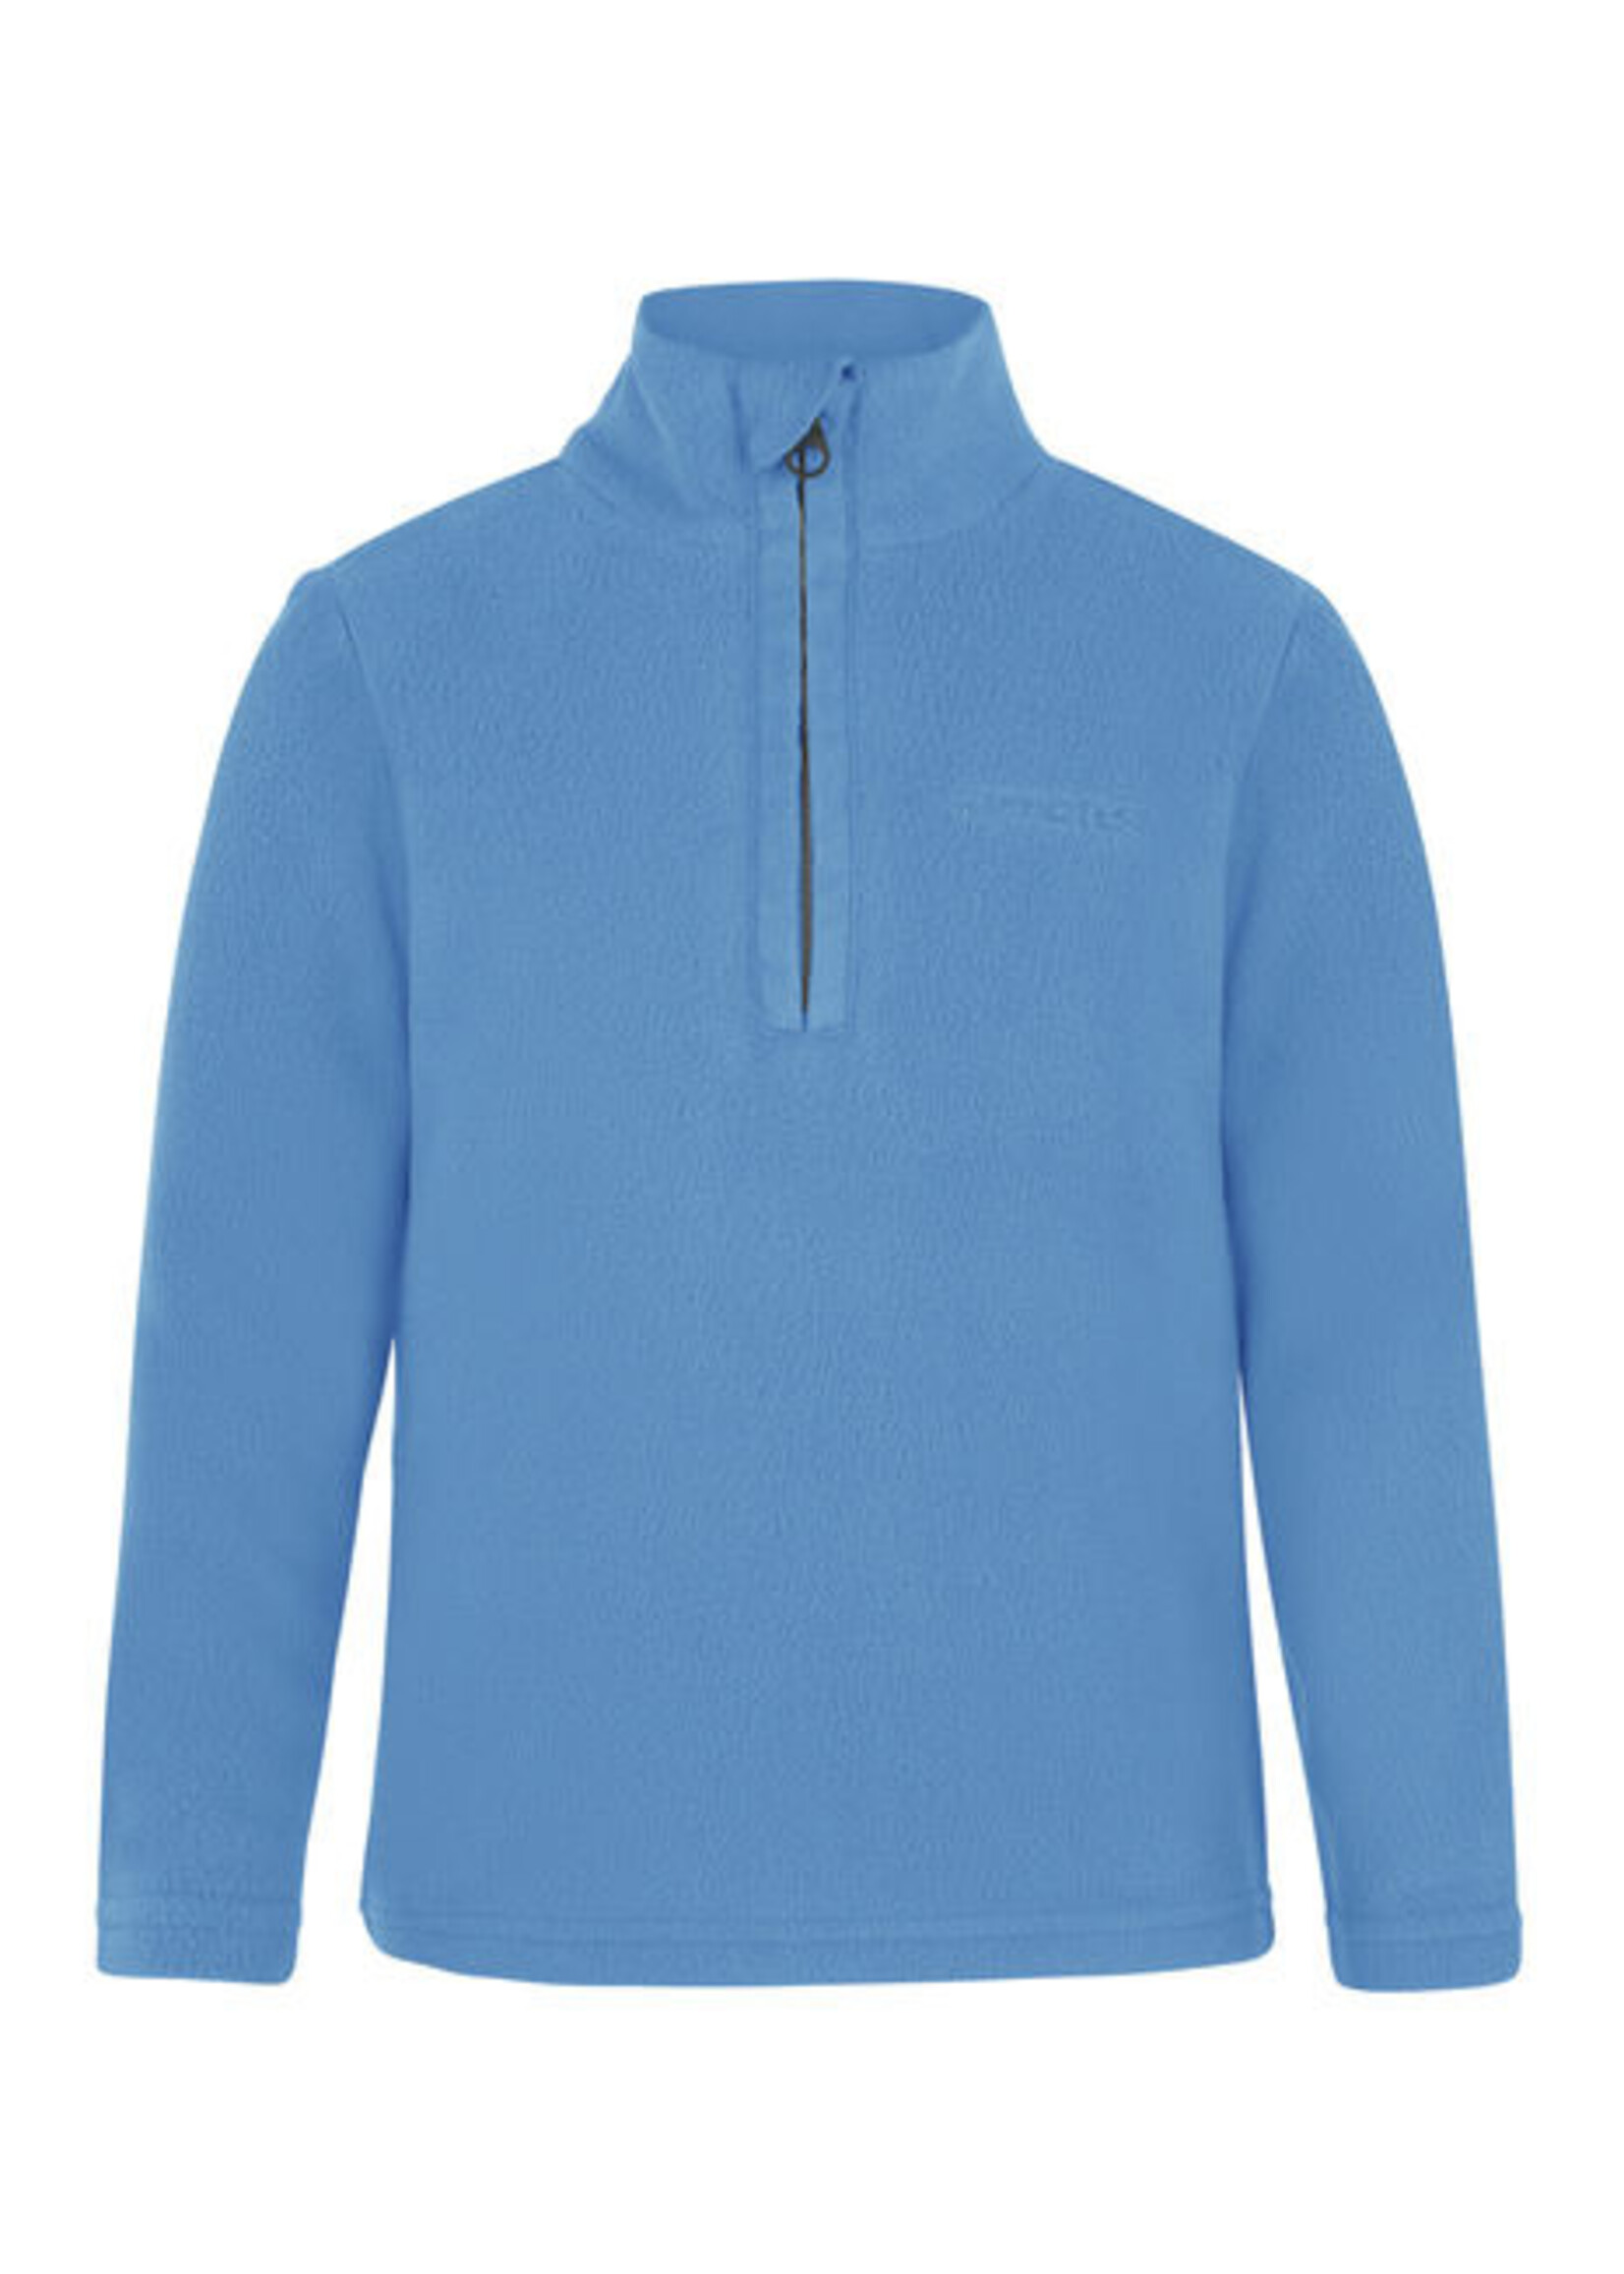 PROTEST  PERFECT TD 1/4 zip top-Riviera Blue